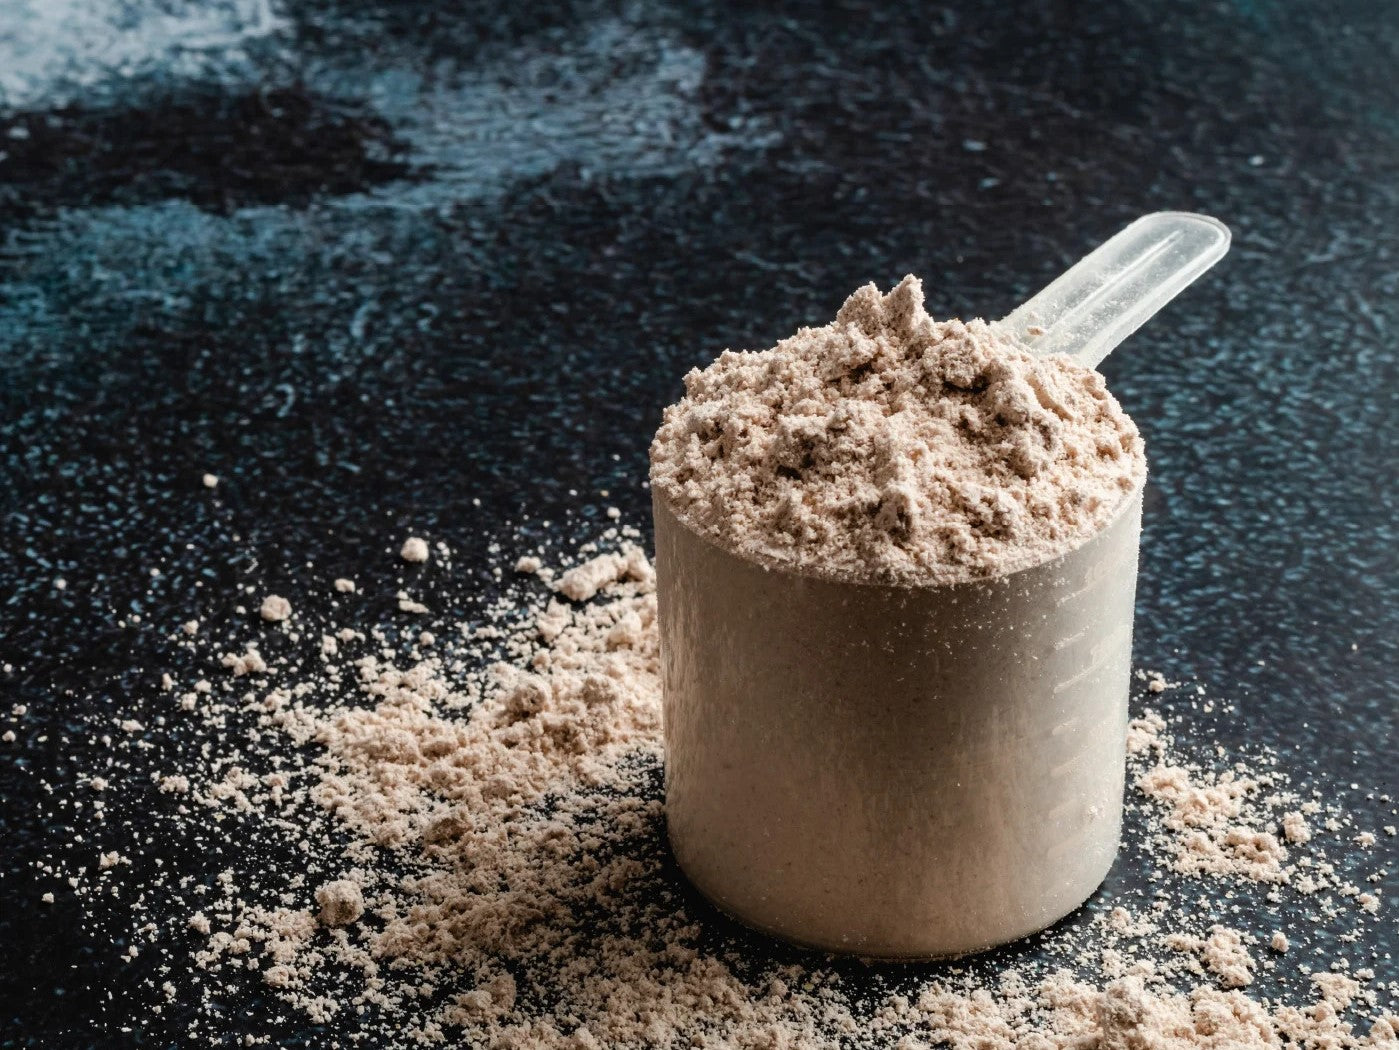 How many grams of protein can your body absorb per serving?